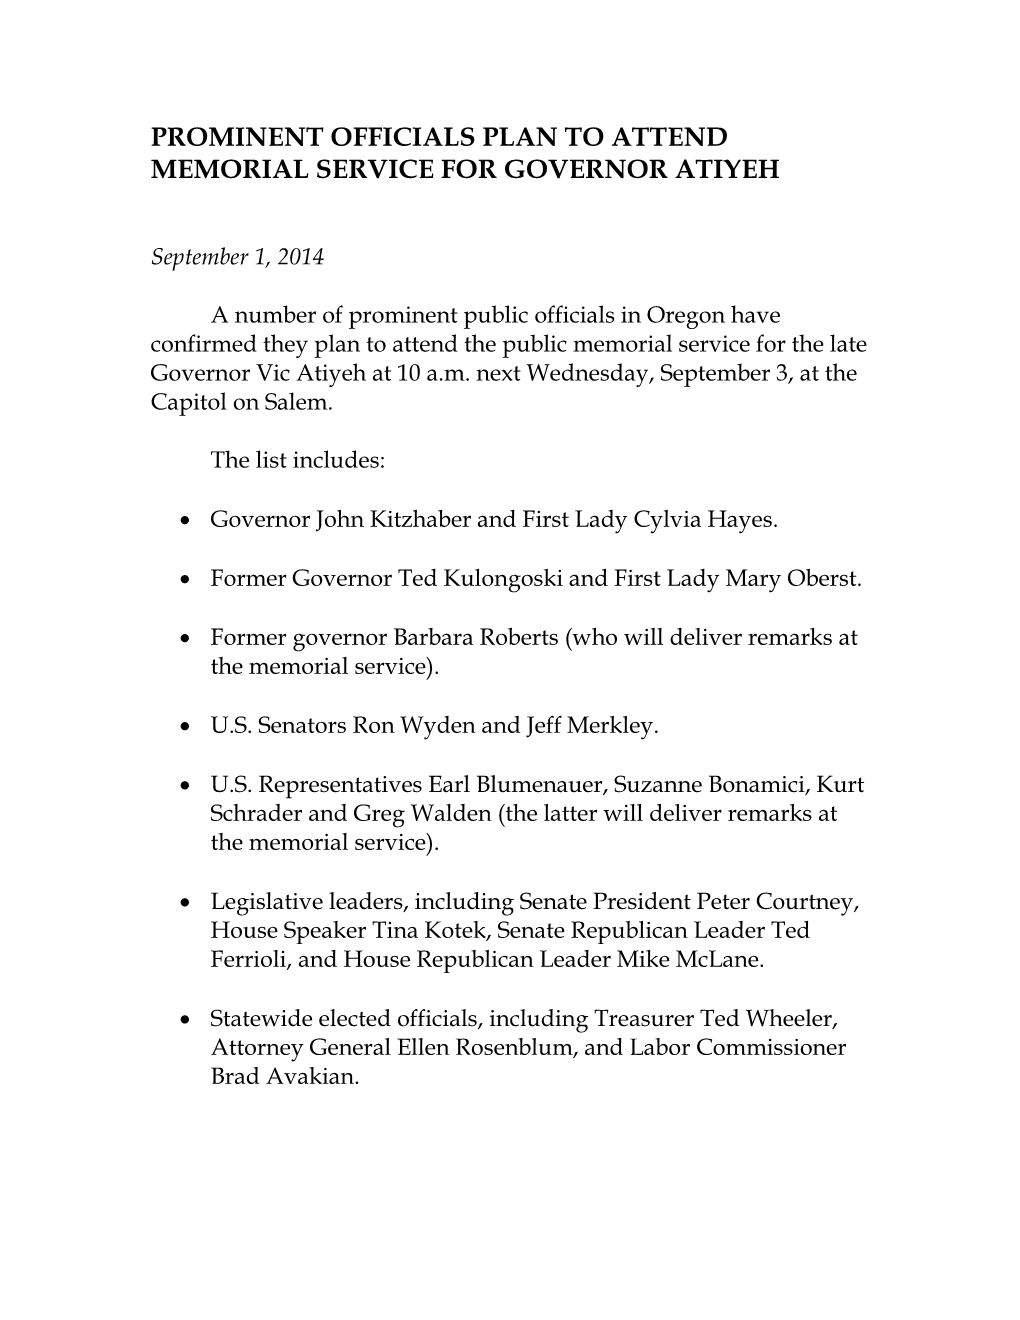 Prominent Officials Plan to Attend Memorial Service for Governor Atiyeh